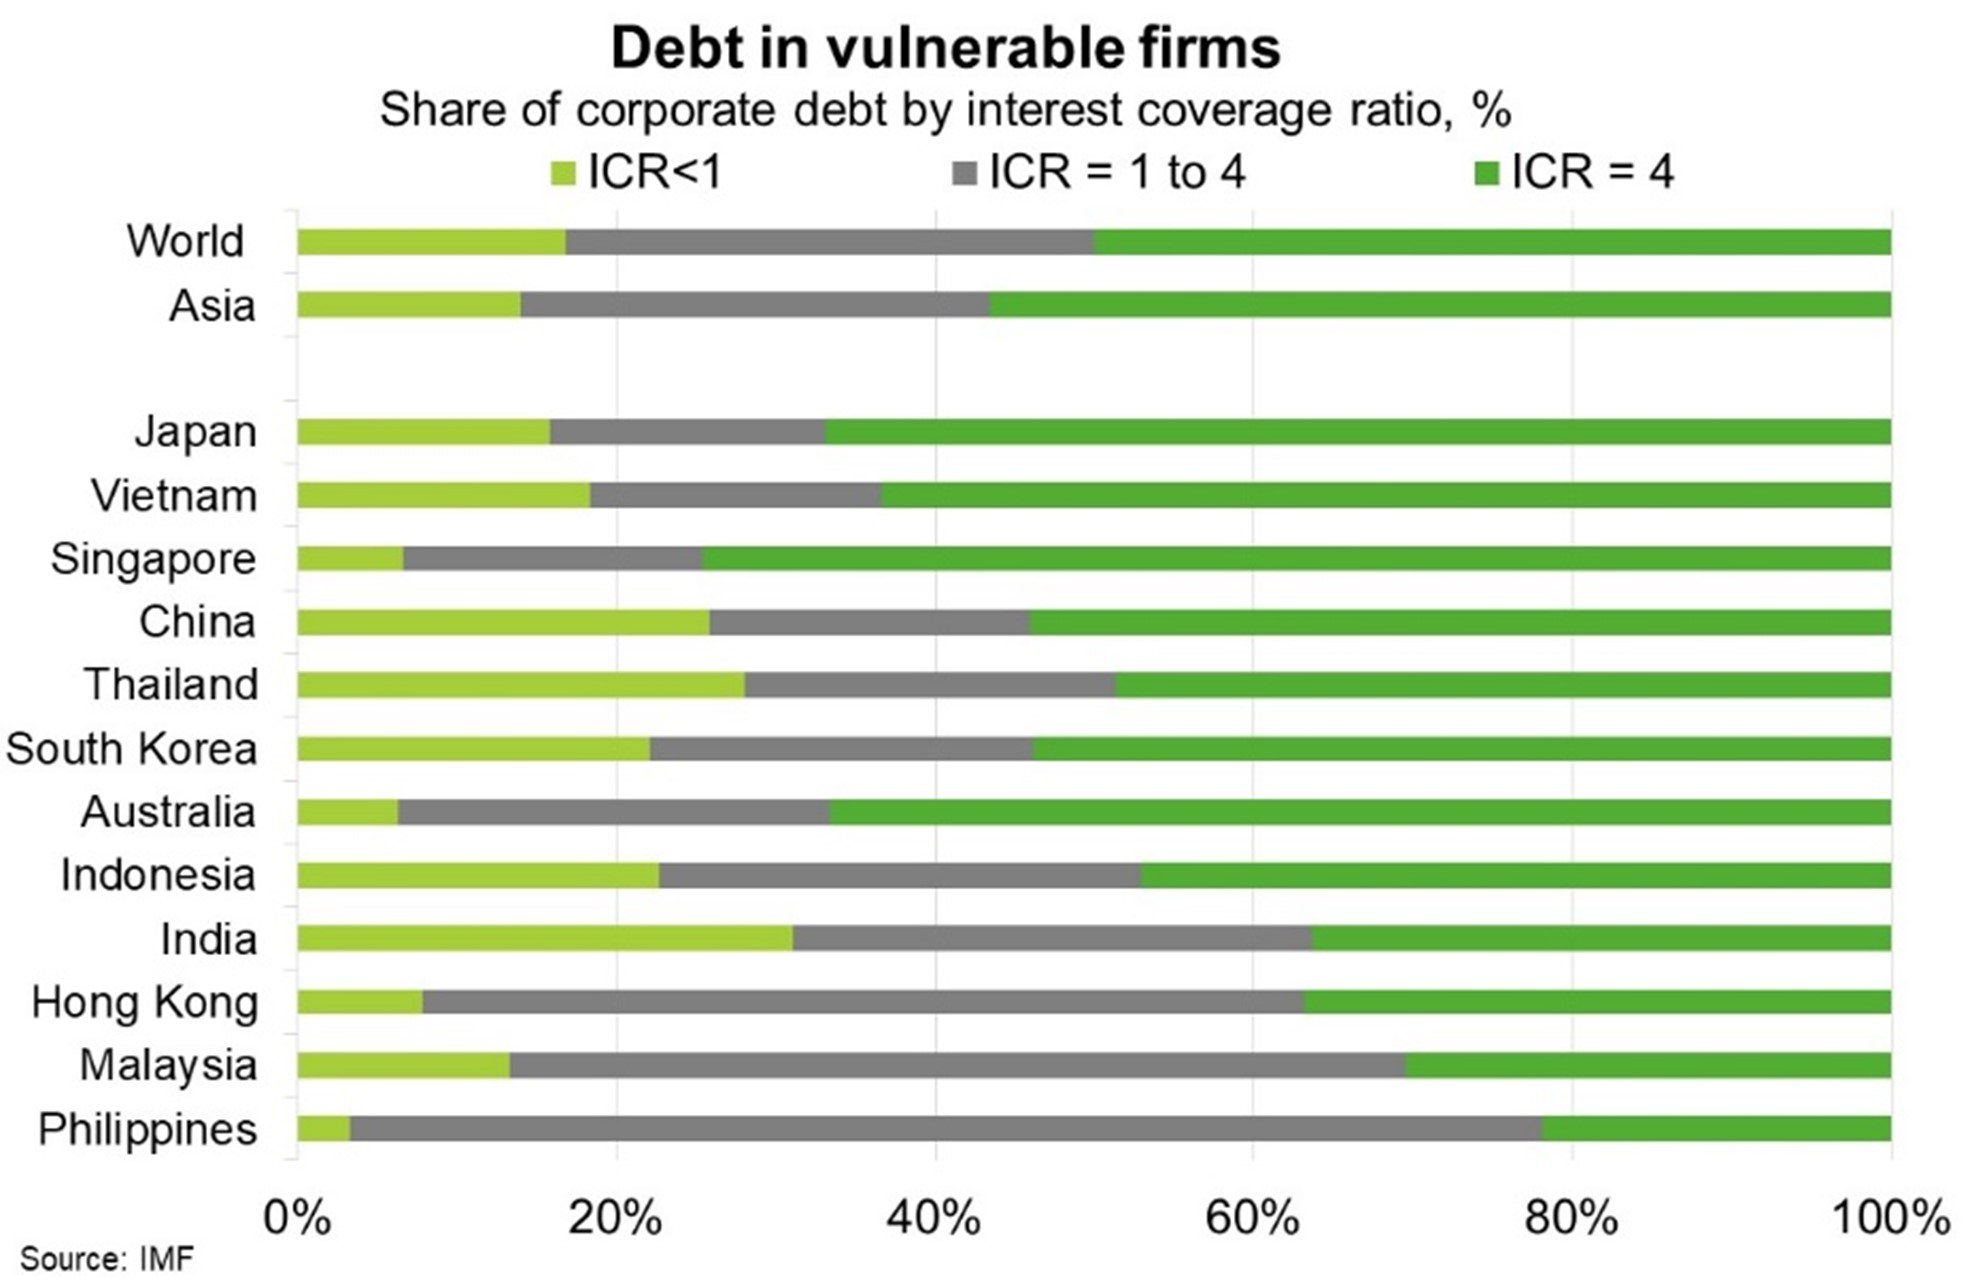 As of mid-2022, 17% of Asia’s corporate debt was held by firms with ICRs below one. 